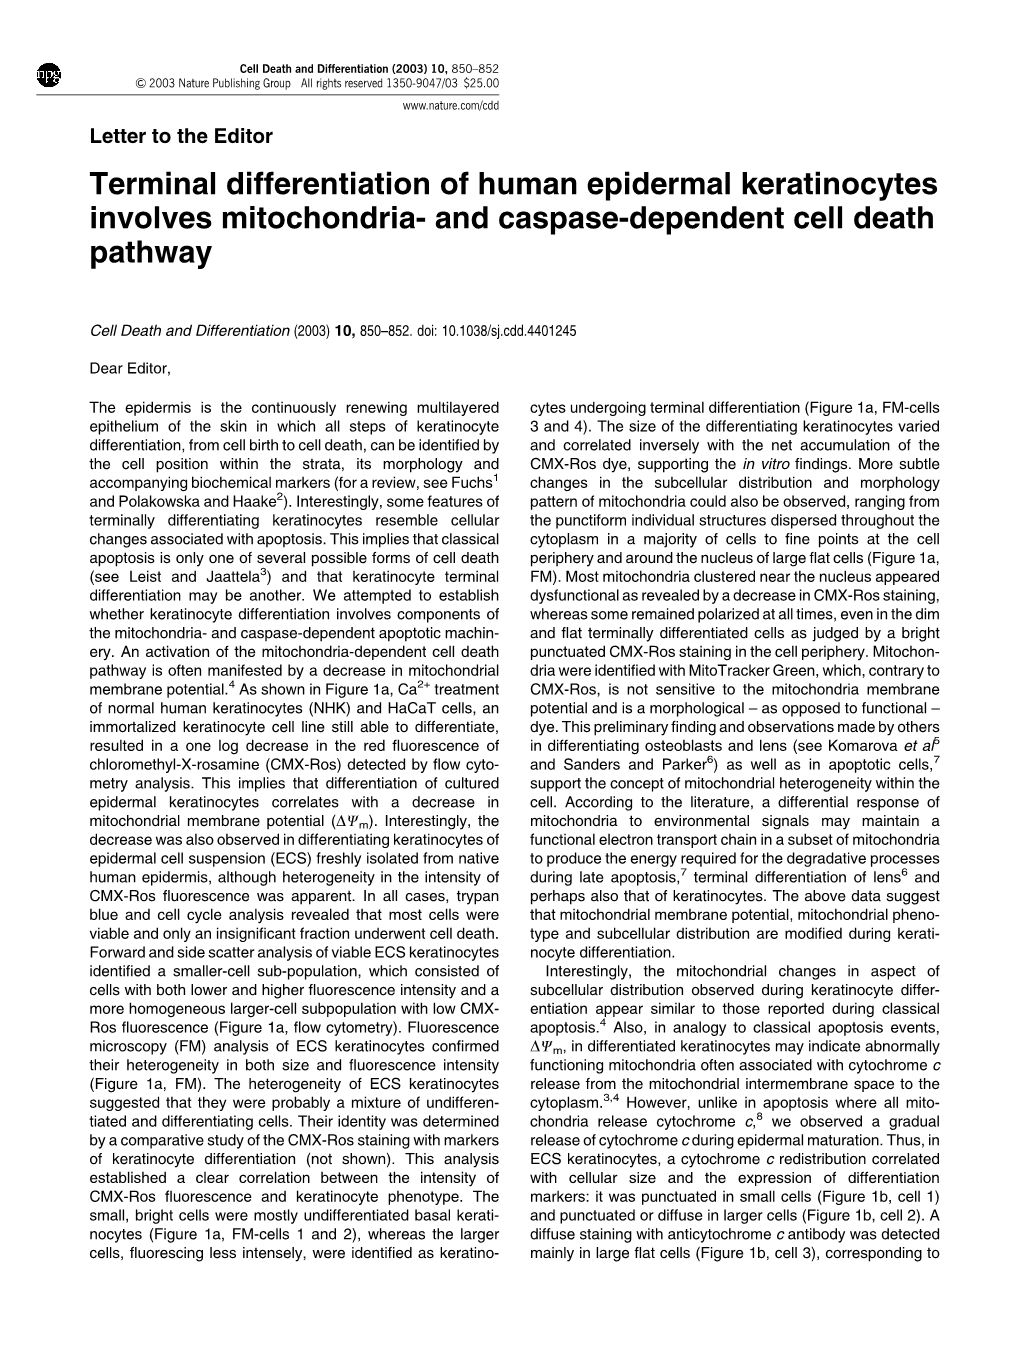 Terminal Differentiation of Human Epidermal Keratinocytes Involves Mitochondria- and Caspase-Dependent Cell Death Pathway